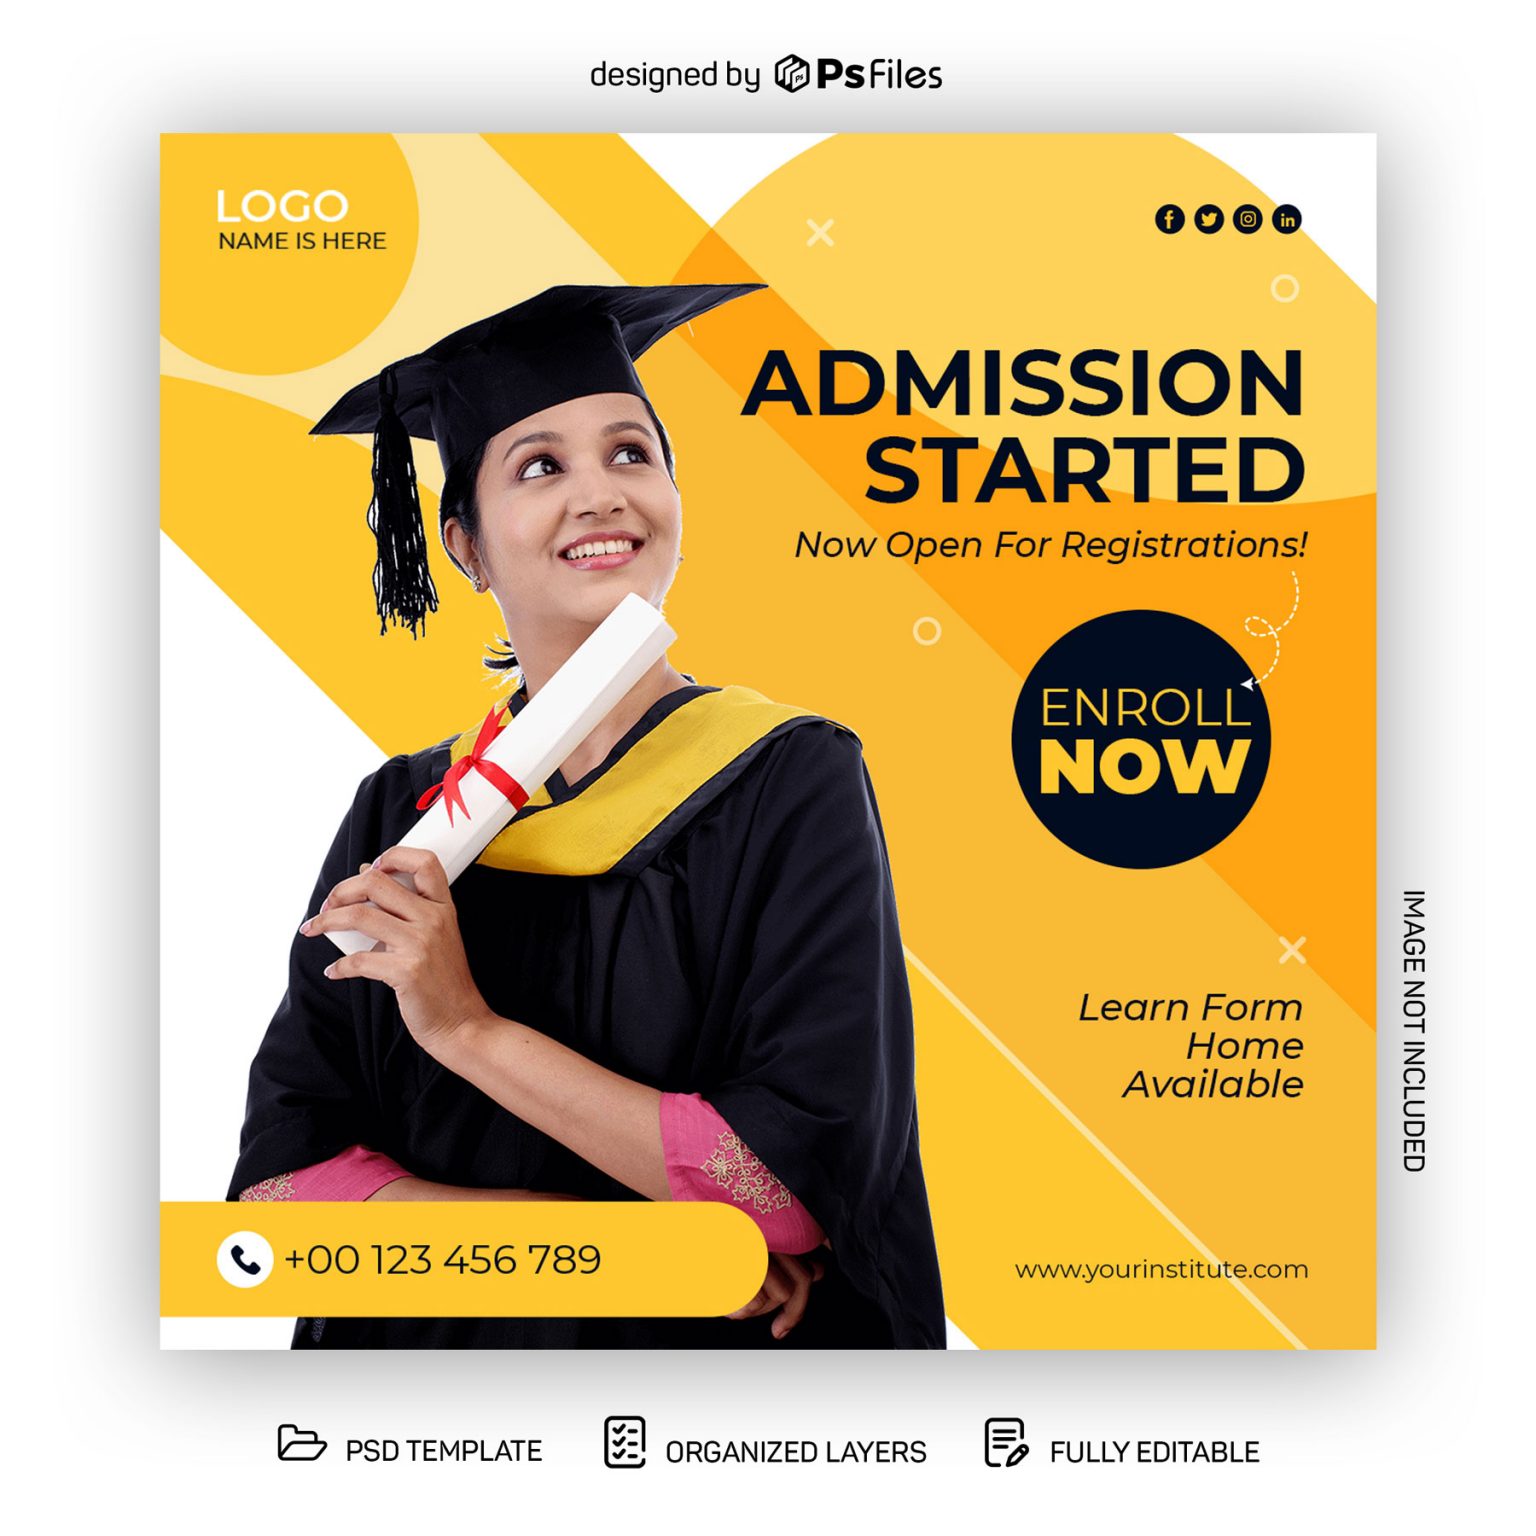 College Admission Instagram Post Design Template PSD Free Download